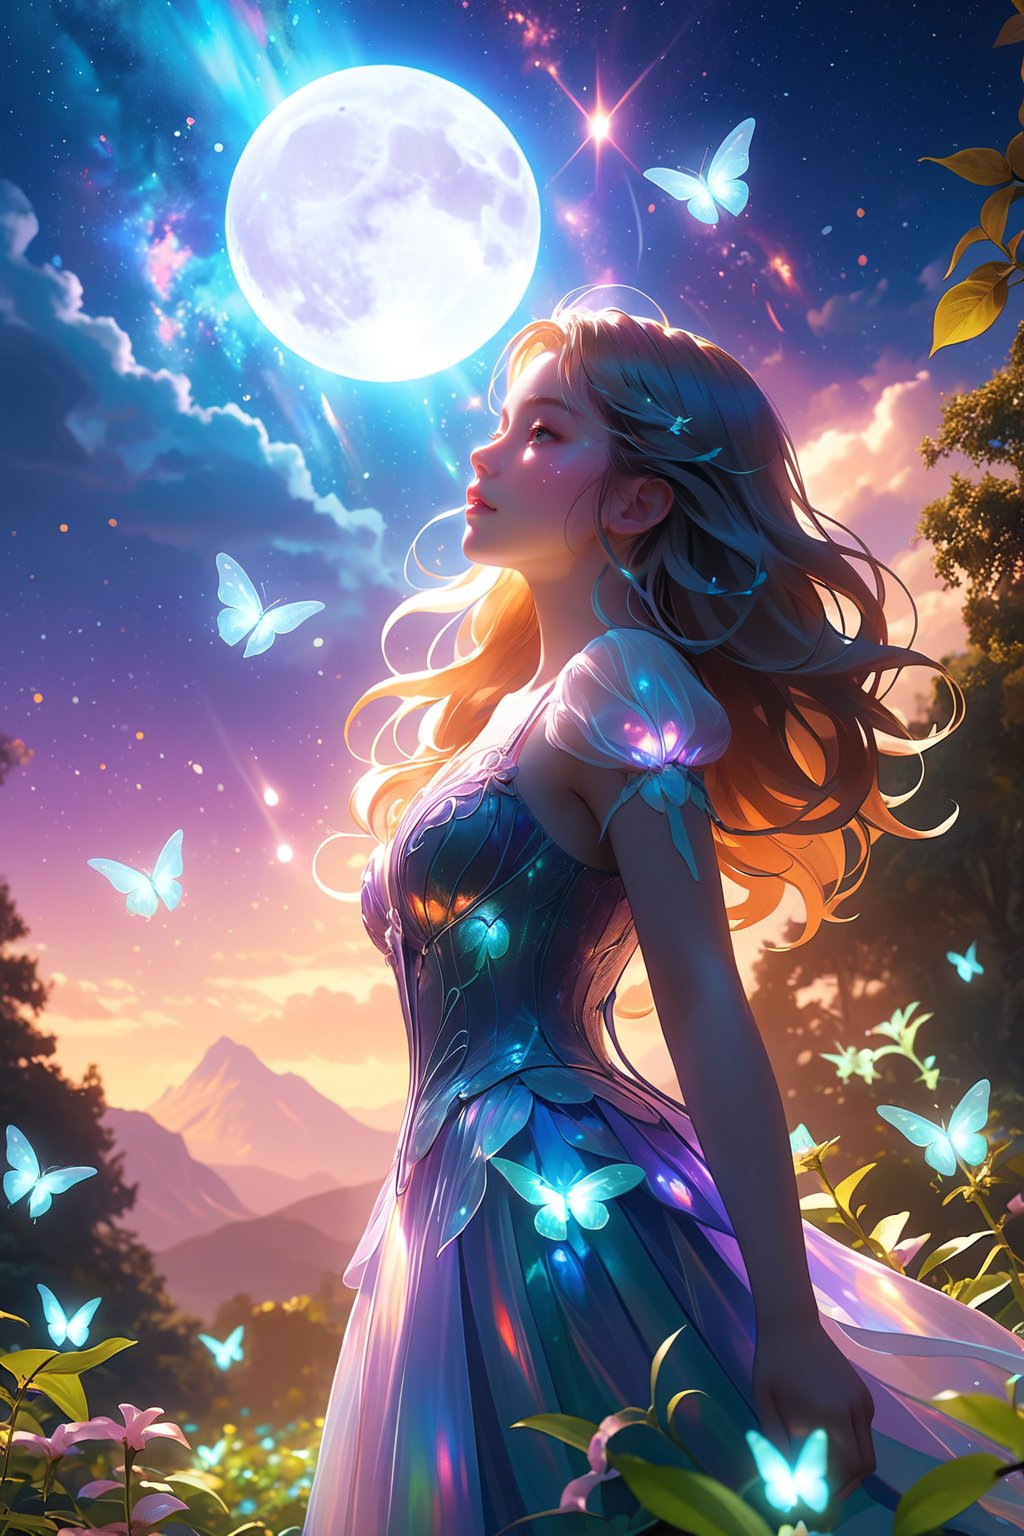 expansive landscape photograph,(a view from below that shows sky above and open field below),a girl standing on flower field looking up,(full moon:1.2),( shooting stars:0.9),(nebula:1.3),distant mountain,tree BREAK production art,(warm light source:1.2),(Firefly:1.2),lamp,lot of purple and orange,intricate details,volumetric lighting BREAK (masterpiece:1.2),(best quality),4k,ultra-detailed,(dynamic composition:1.4),highly detailed,colorful details,( iridescent colors:1.2),(glowing lighting,atmospheric lighting),dreamy,magical,(solo:1.2)